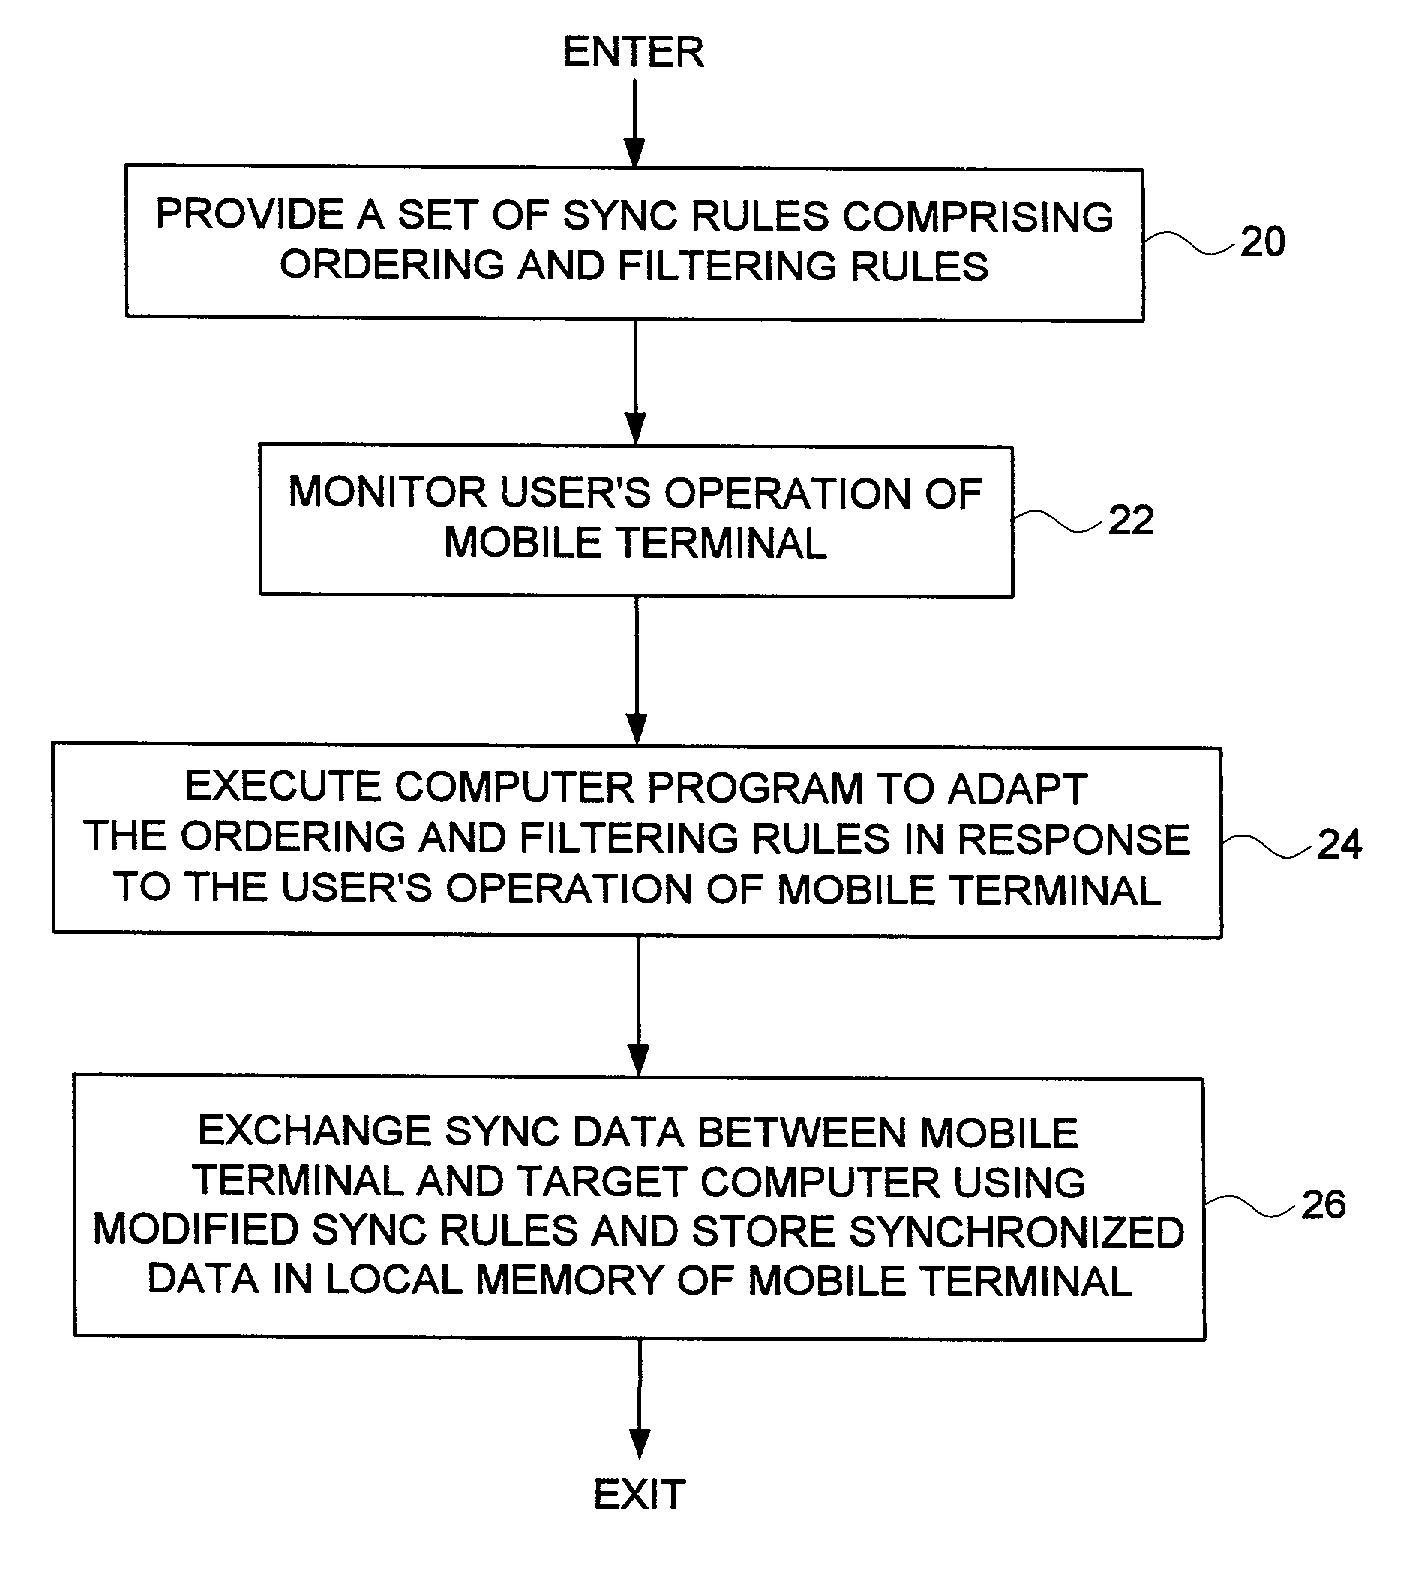 Remotely synchronizing a mobile terminal by adapting ordering and filtering synchronization rules based on a user's operation of the mobile terminal